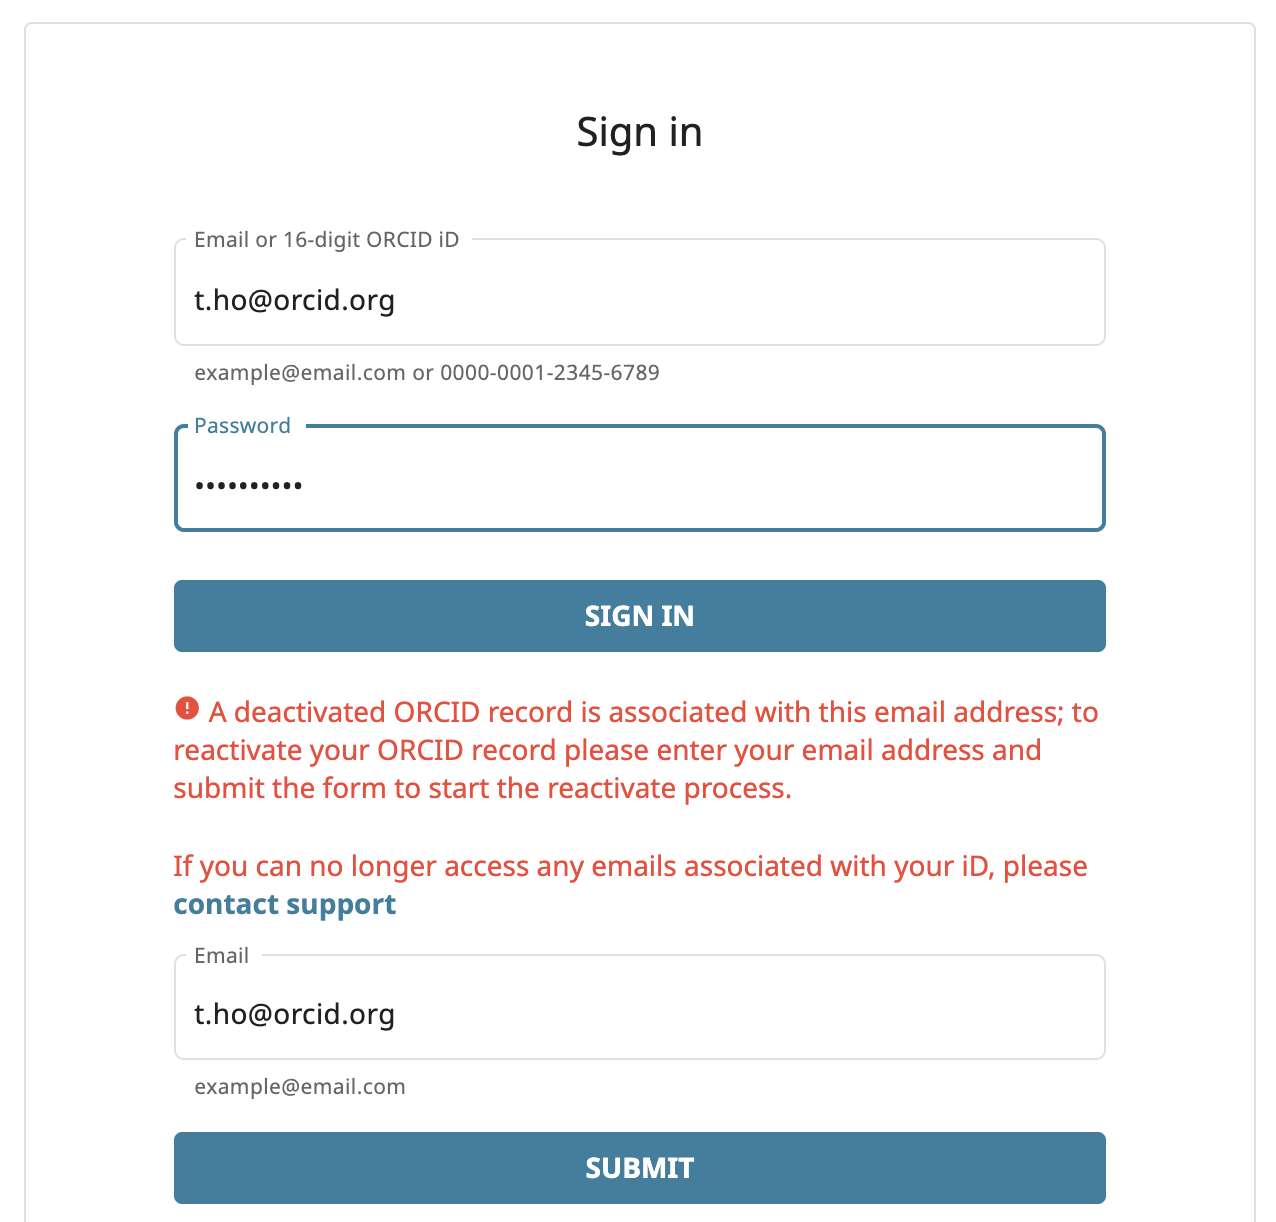 Screenshot of sign-in page showing a message that says that a deactivated ORCID record is associated with the email address that was entered